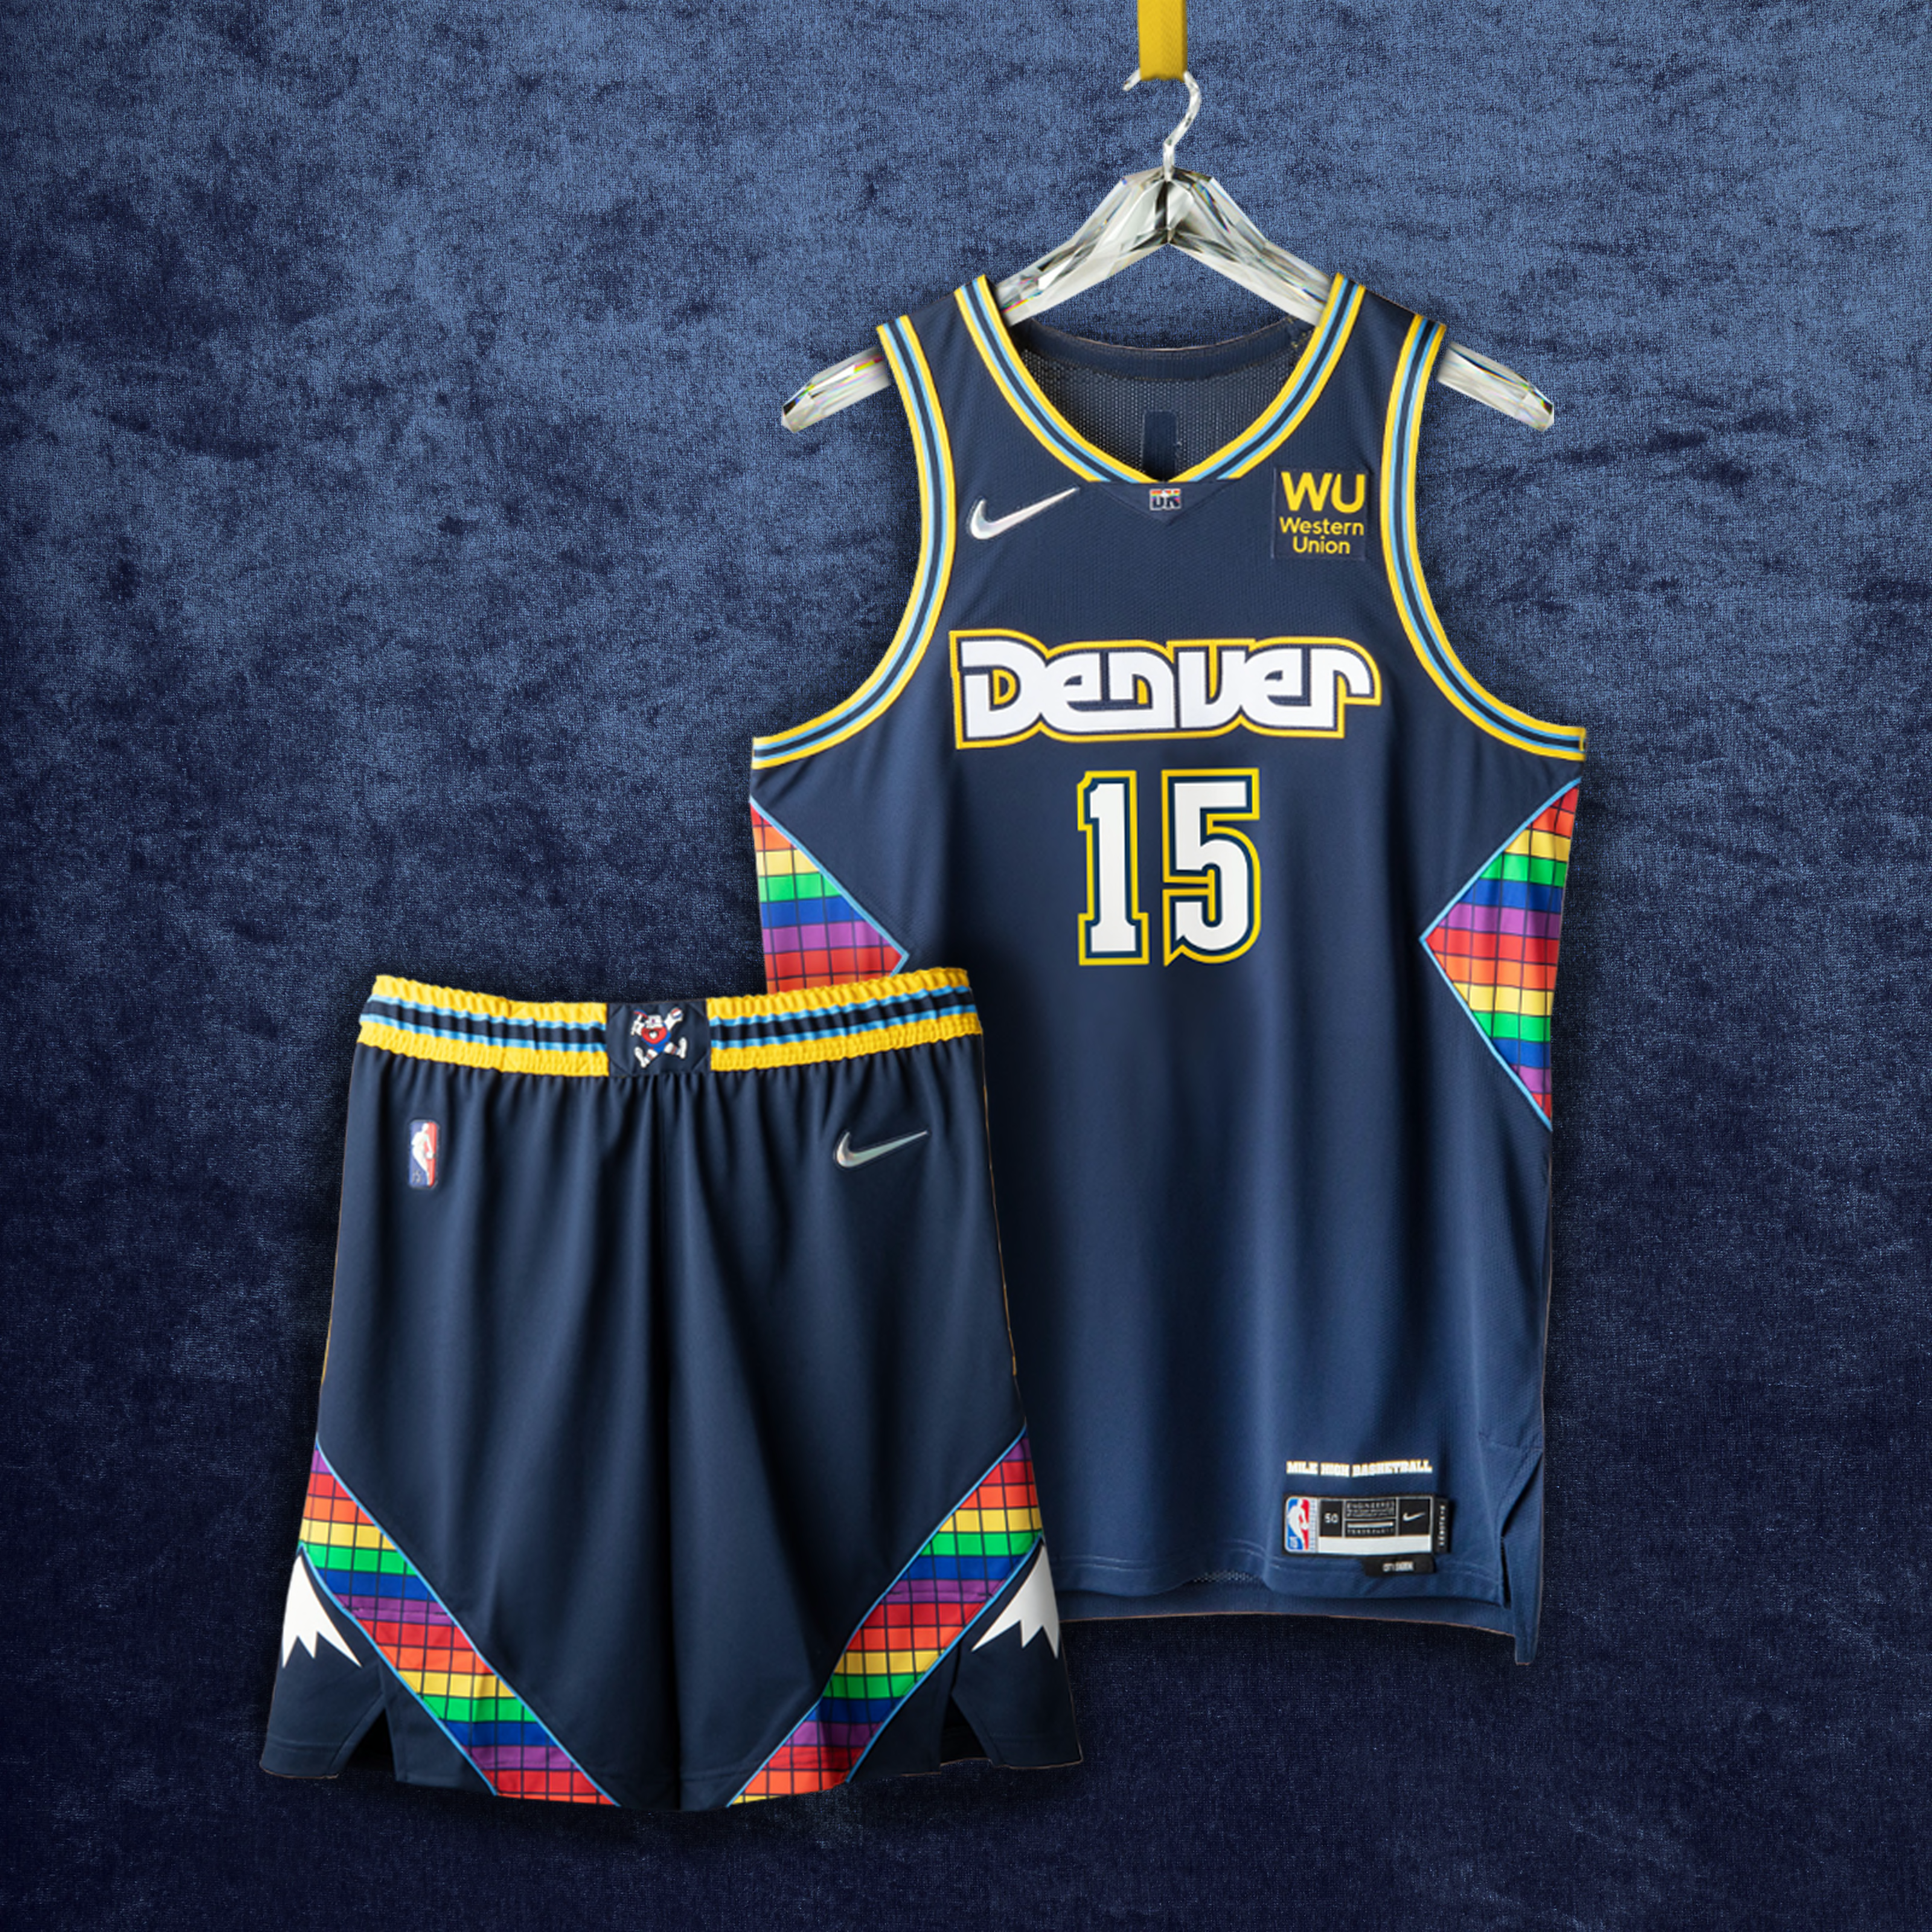 nuggets new city jersey